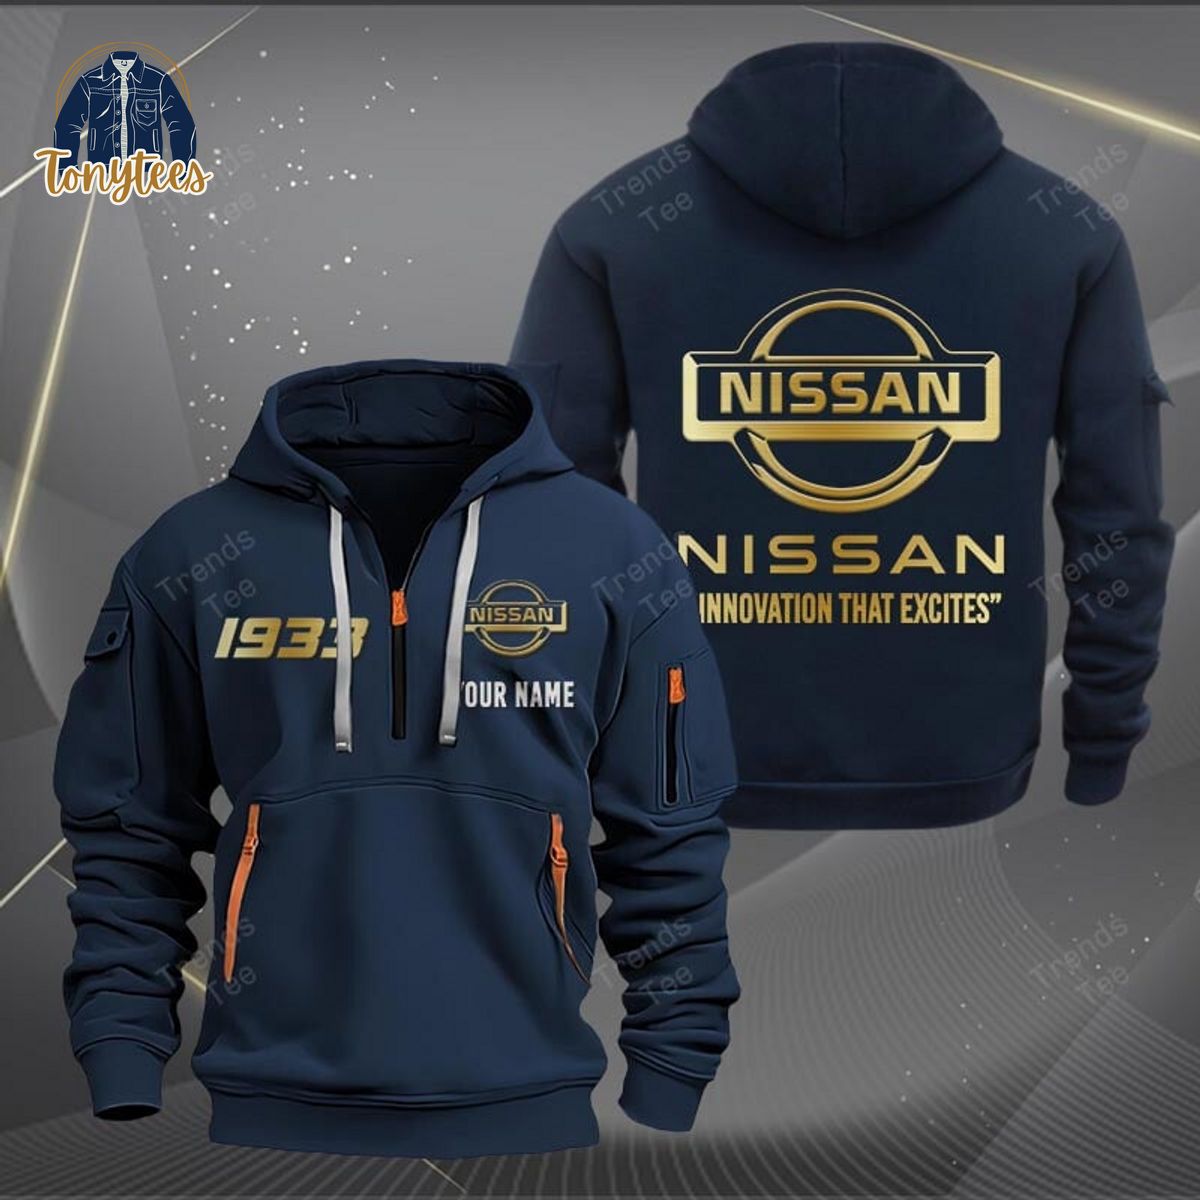 Nissan Innovation that excites Personalized Heavy Hoodie